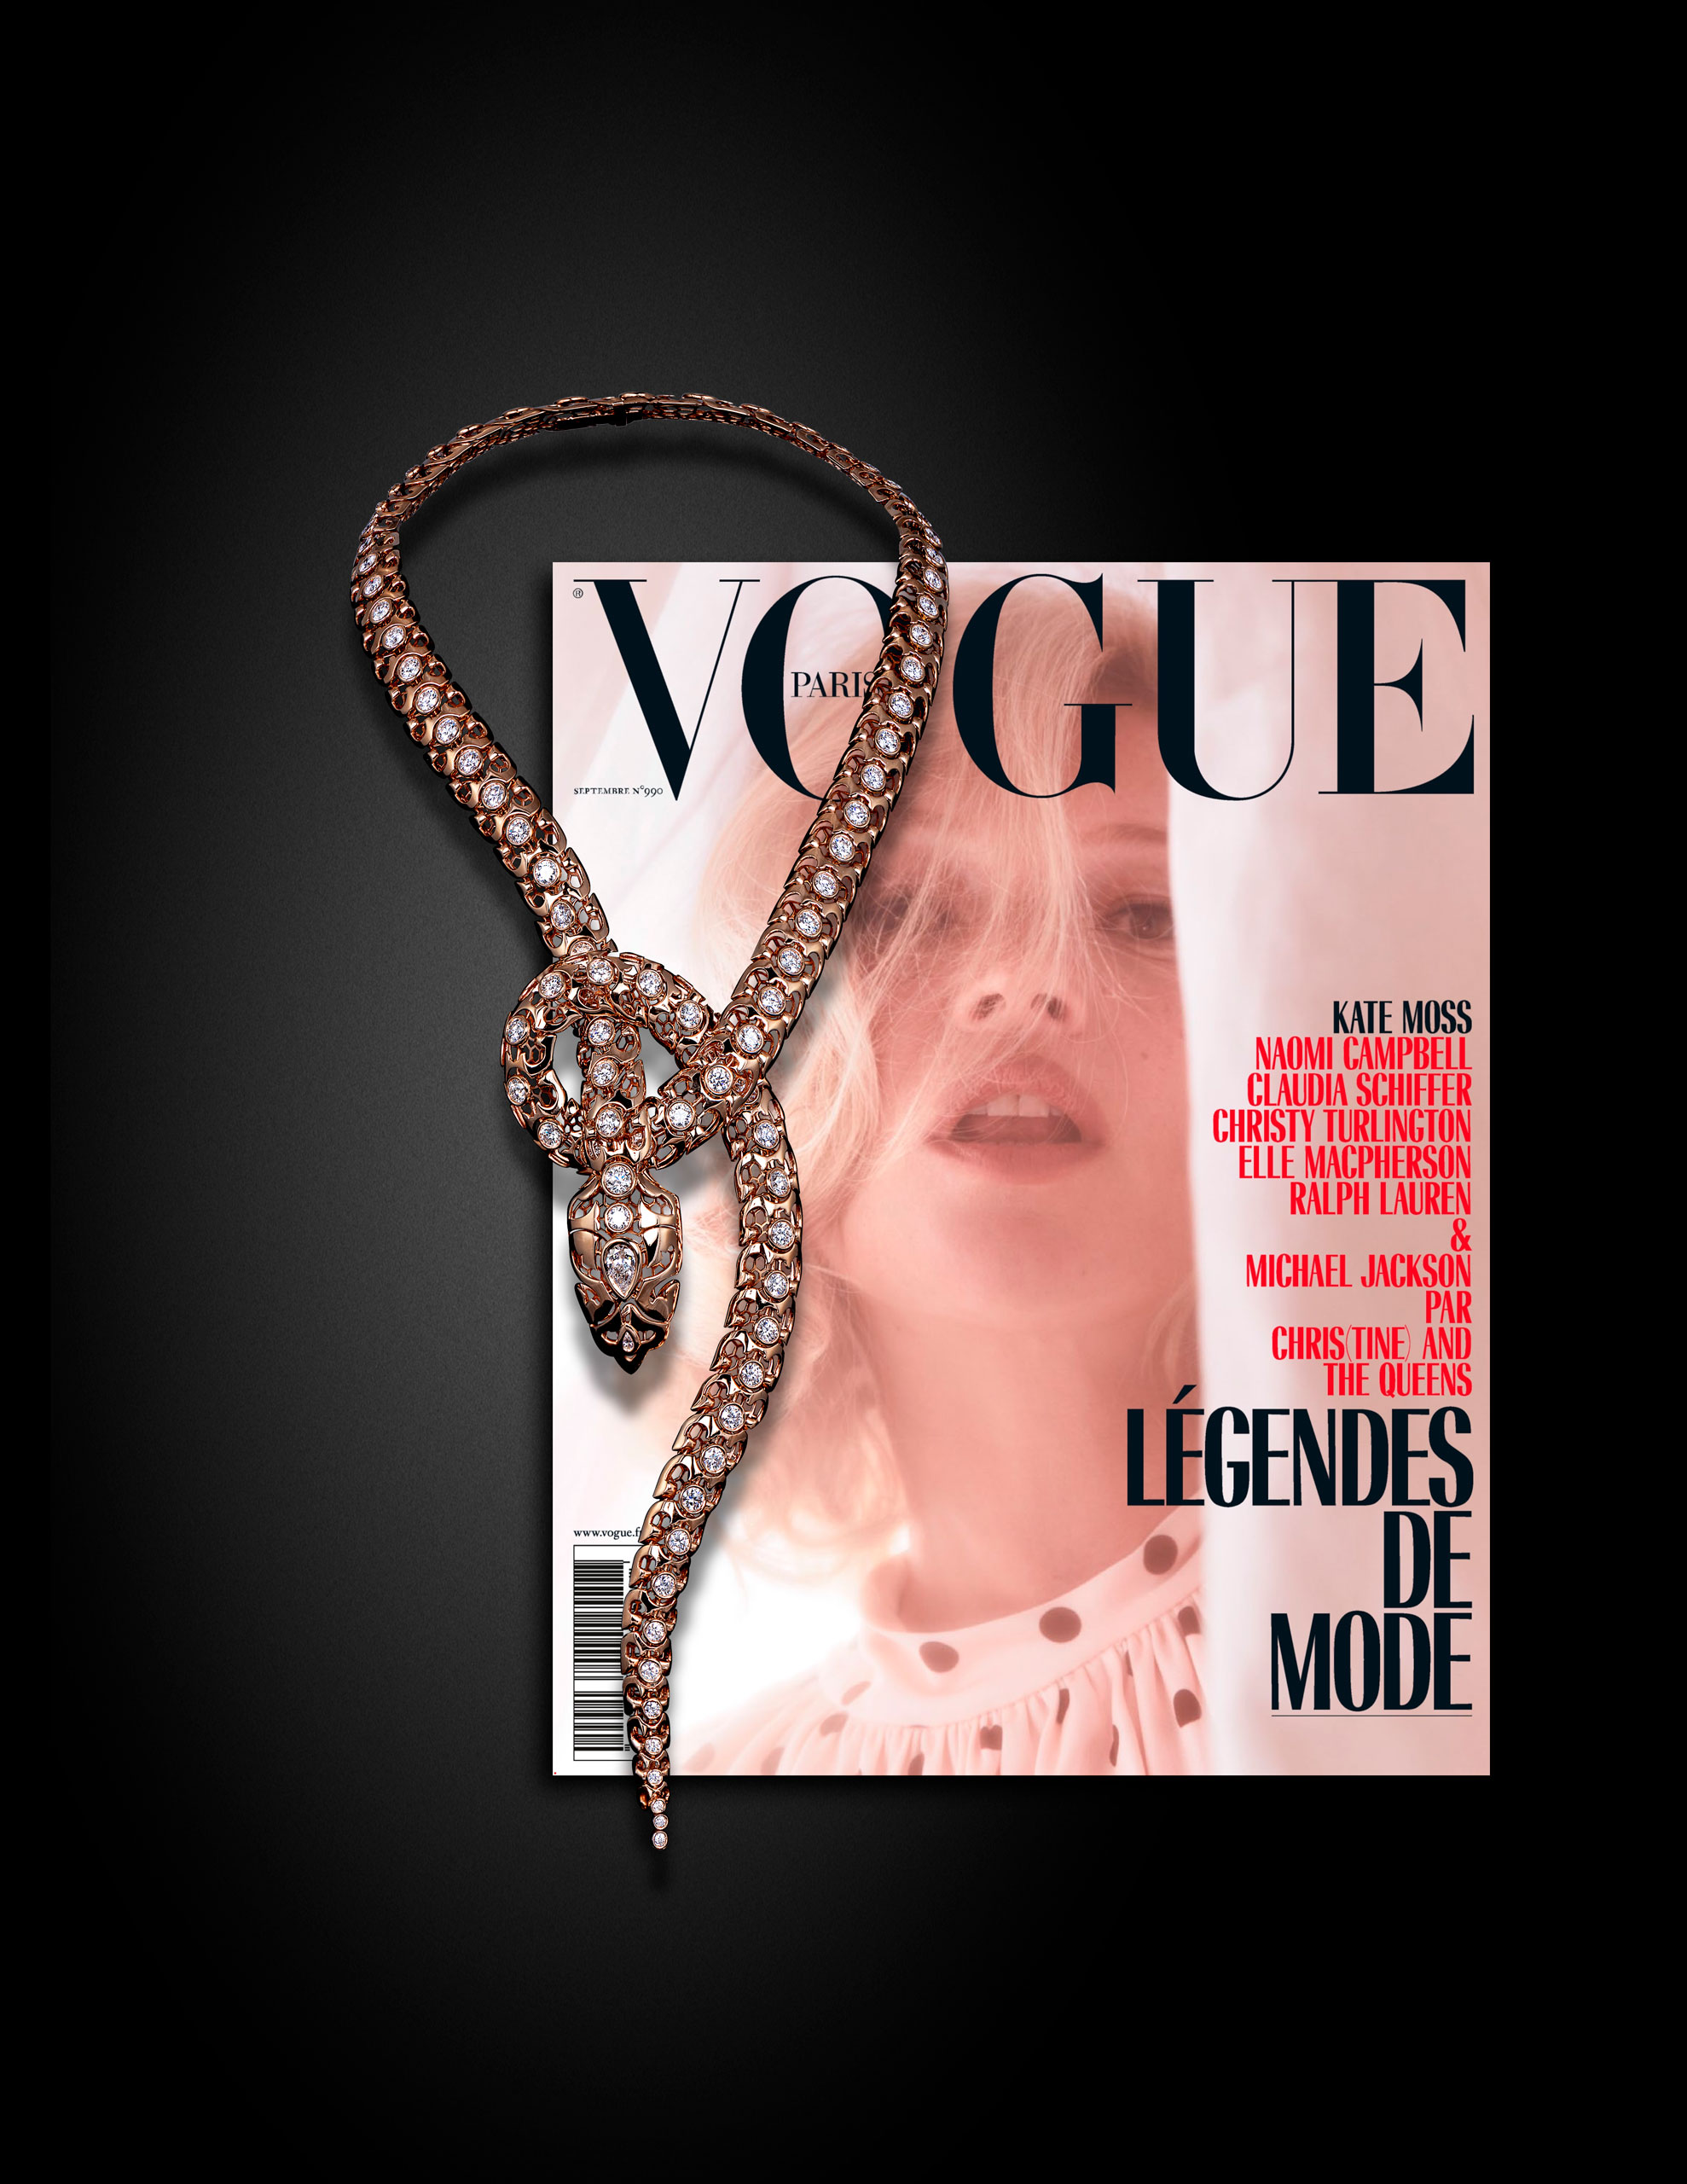 Photo of the pink gold serpentes necklace featured in the 2018 September edition N°990 of Vogue Paris